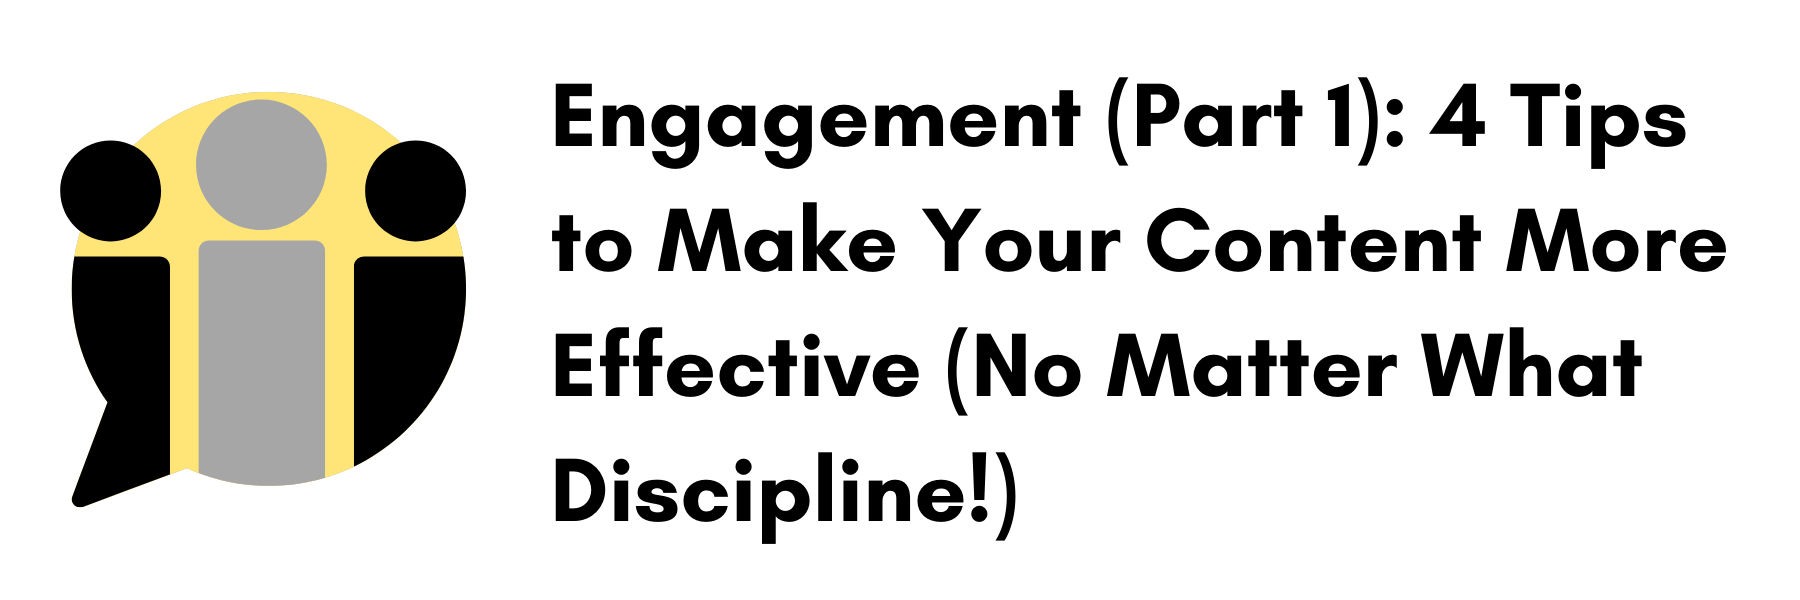 Engagement (Part 1): 4 Tips to Make Your Content More Effective (No Matter What Discipline!) 